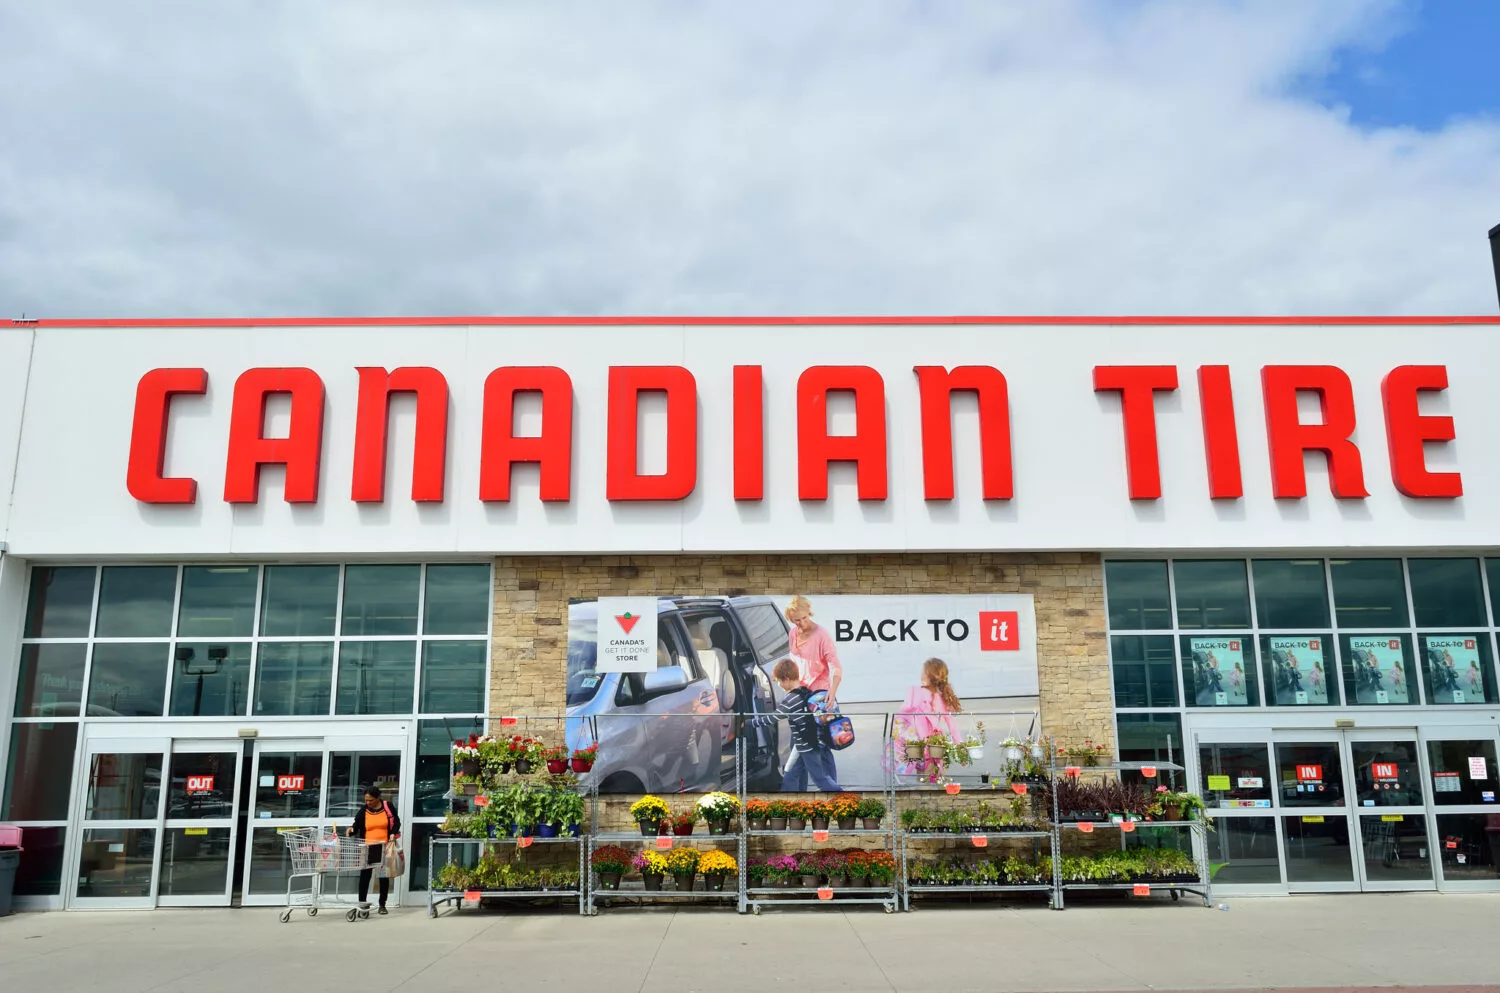 What Does the Canadian Tire Logo Mean